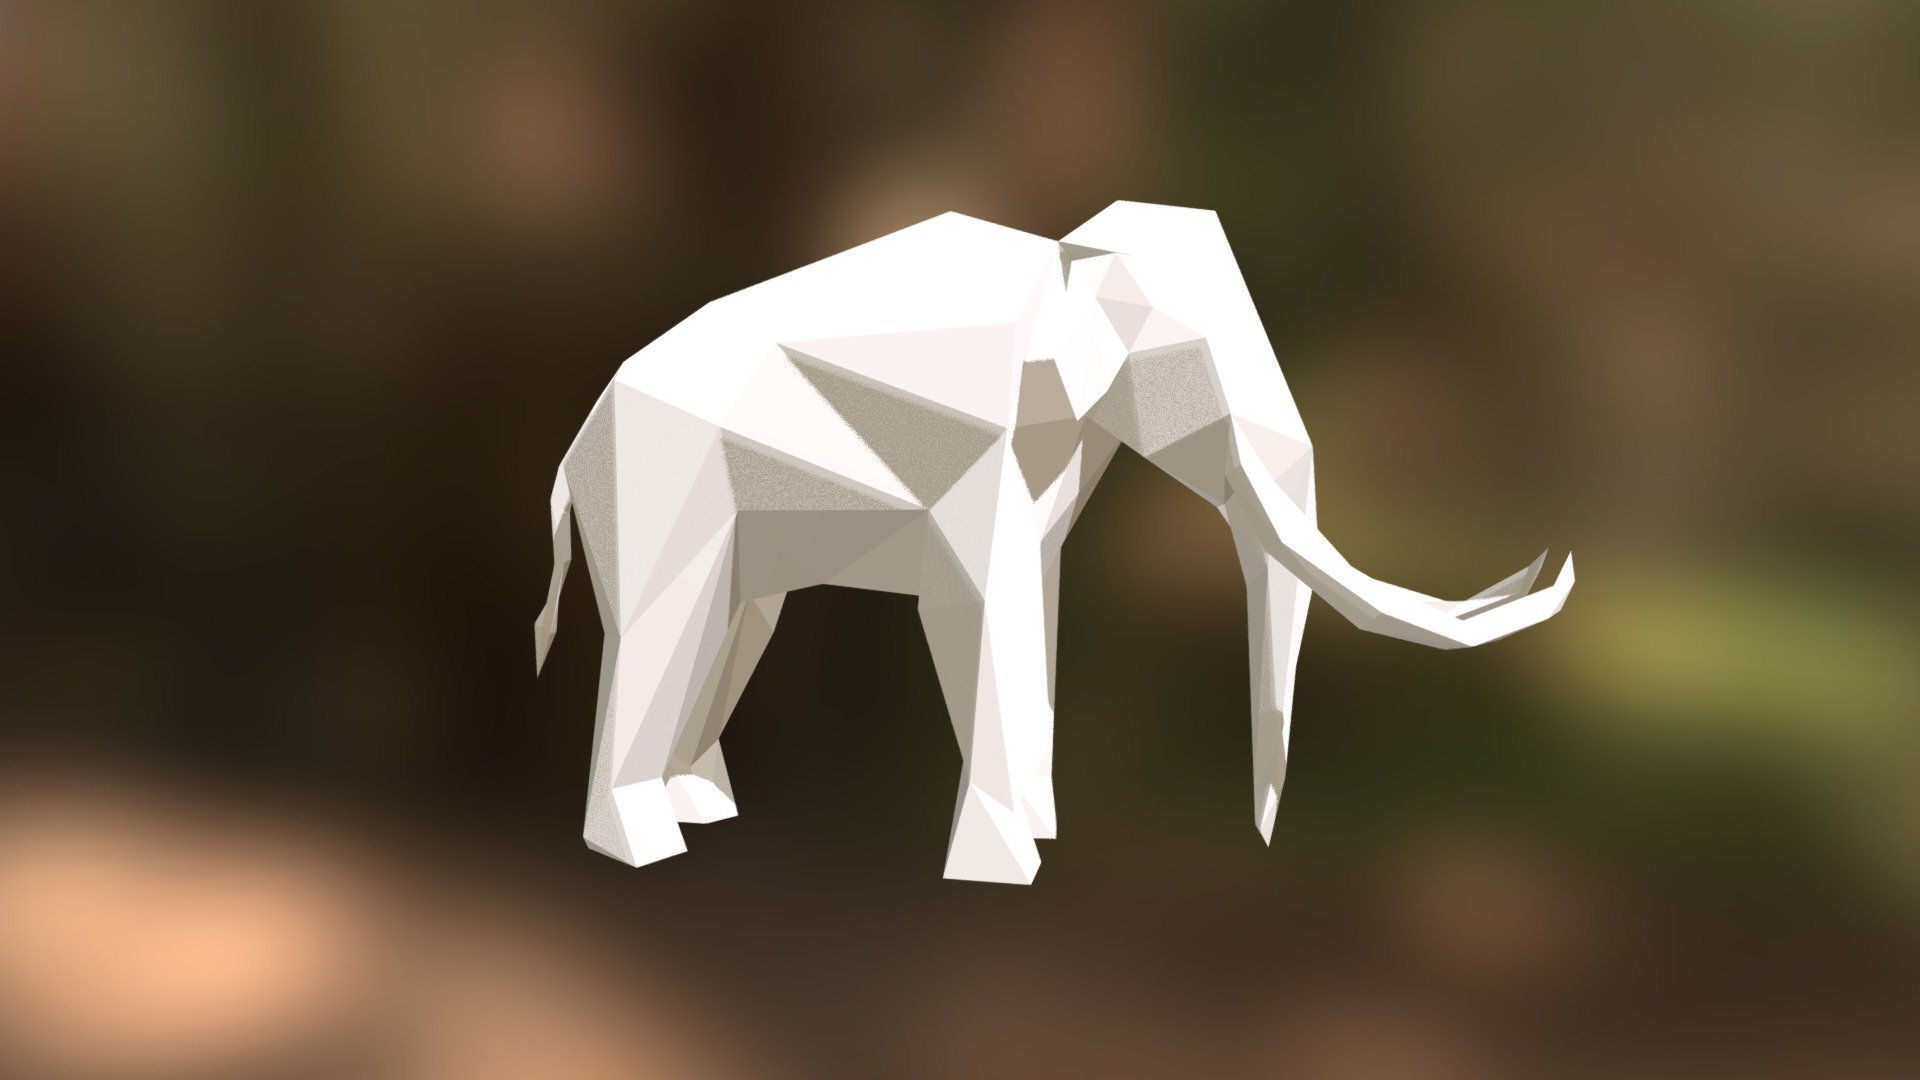 Low Poly 3D model for 3D printing. Mammoth Low Poly sculpture. You can find this model for 3D printing in my shop: -link removed- Reference model: http://www.cadnav.com - Mammoth low poly model for 3D printing - 3D model by Peolla3D 3d model